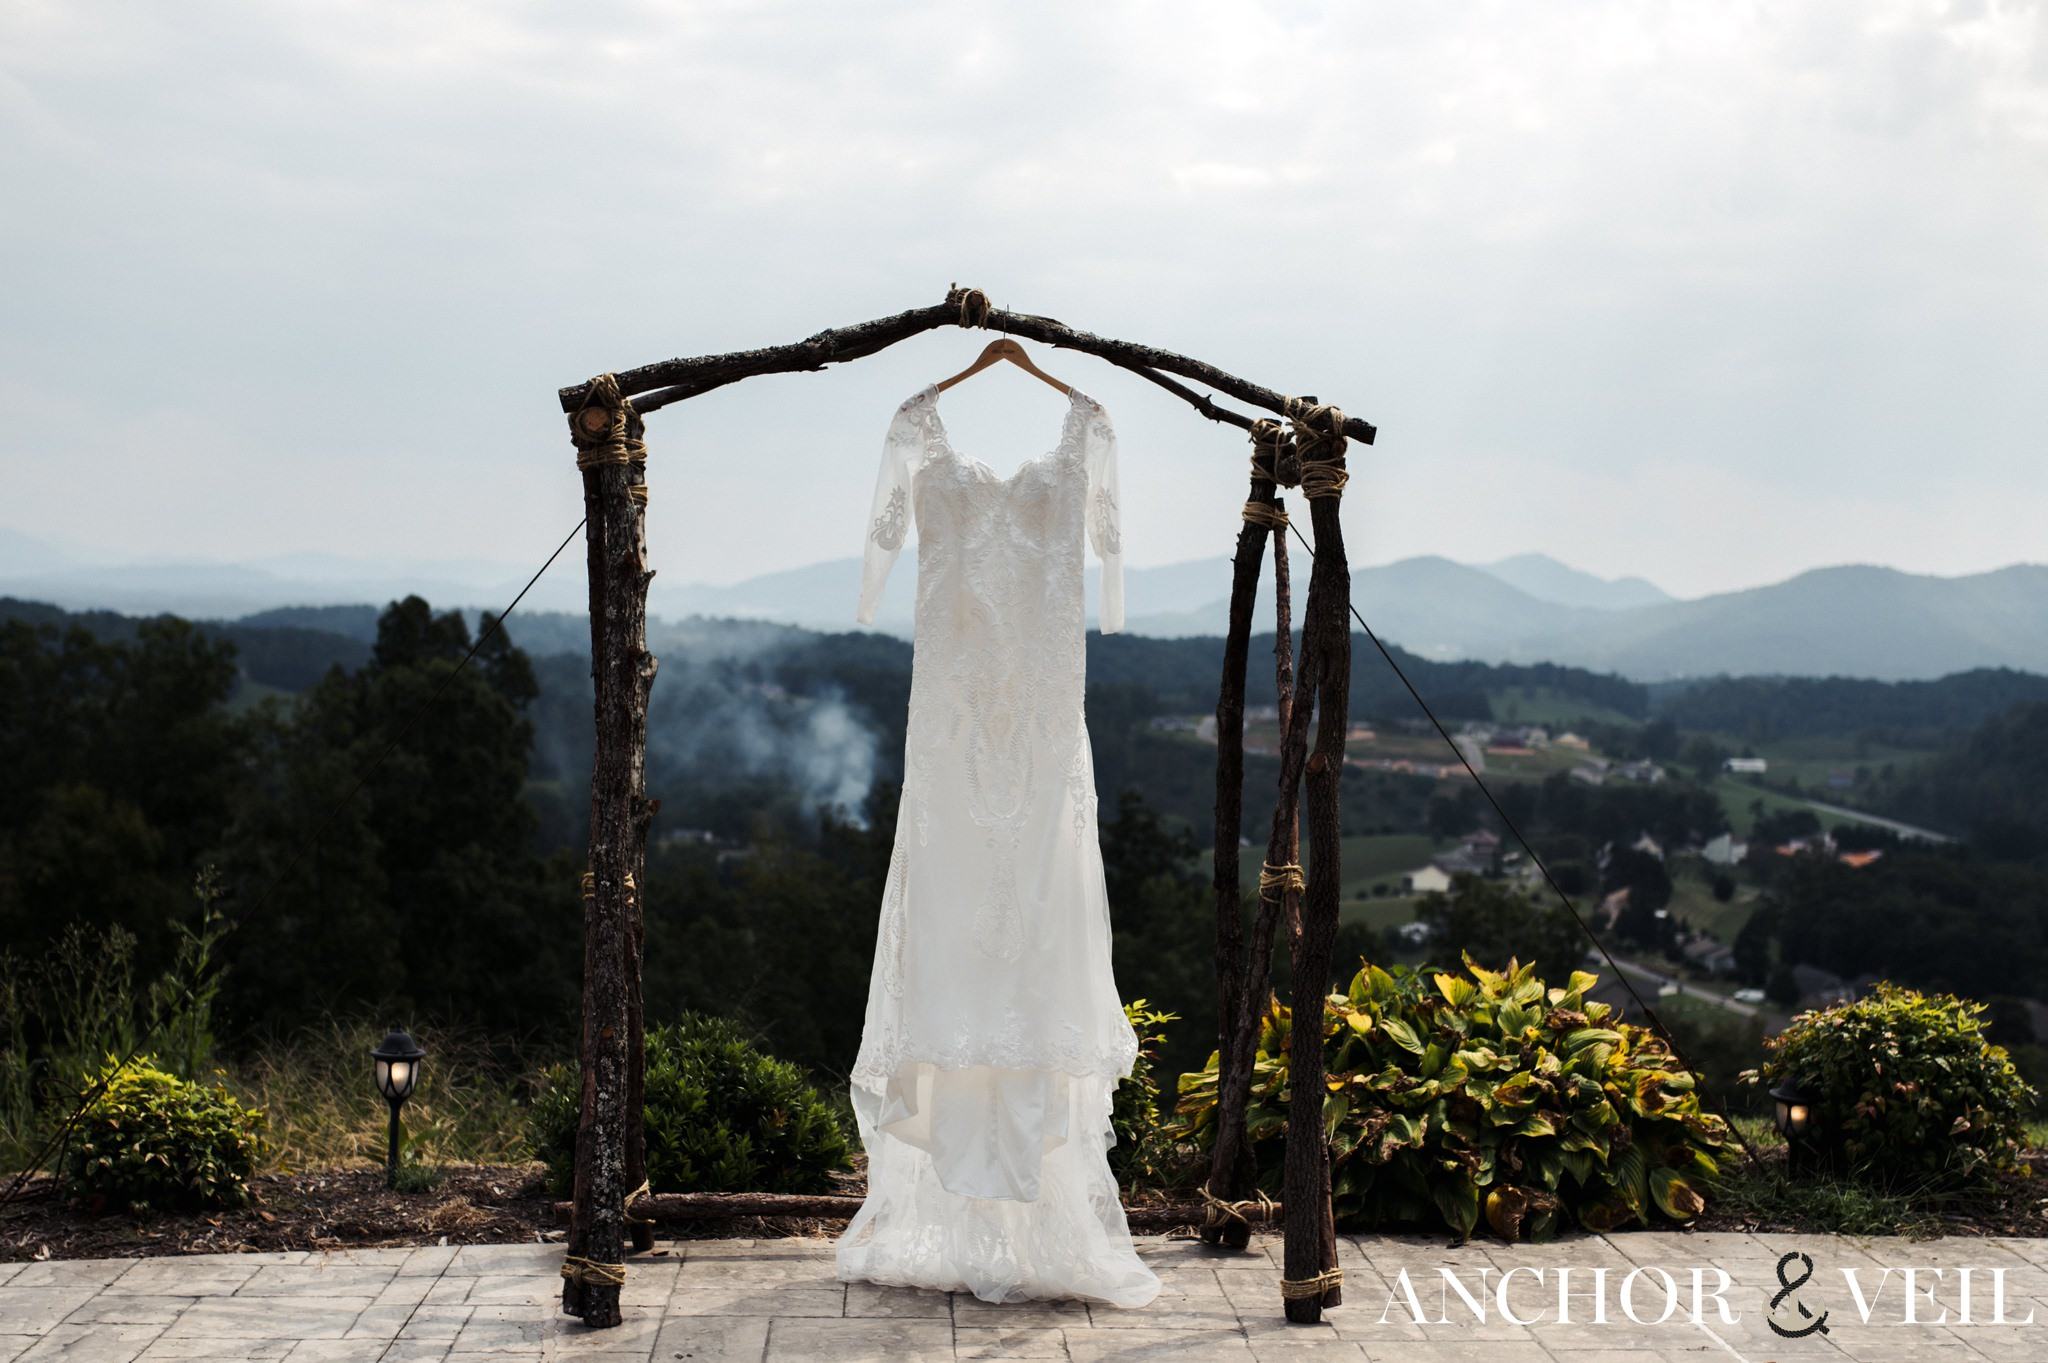 the dress hanging up during the asheville mountains destination wedding